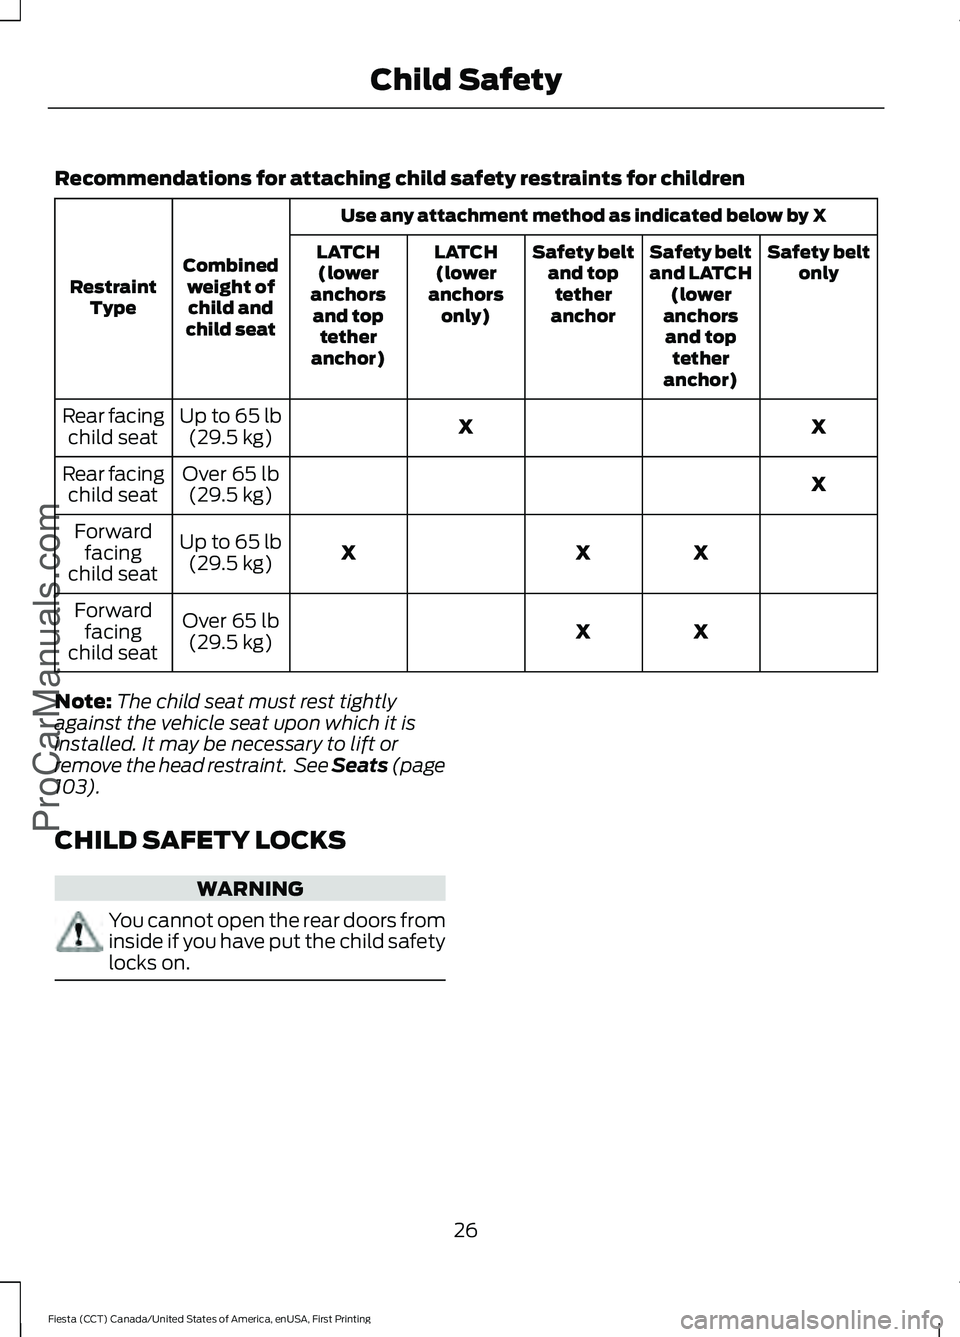 FORD FIESTA 2016 Owners Manual Recommendations for attaching child safety restraints for children
Use any attachment method as indicated below by X
Combined weight ofchild and
child seat
Restraint
Type Safety belt
only
Safety belt
